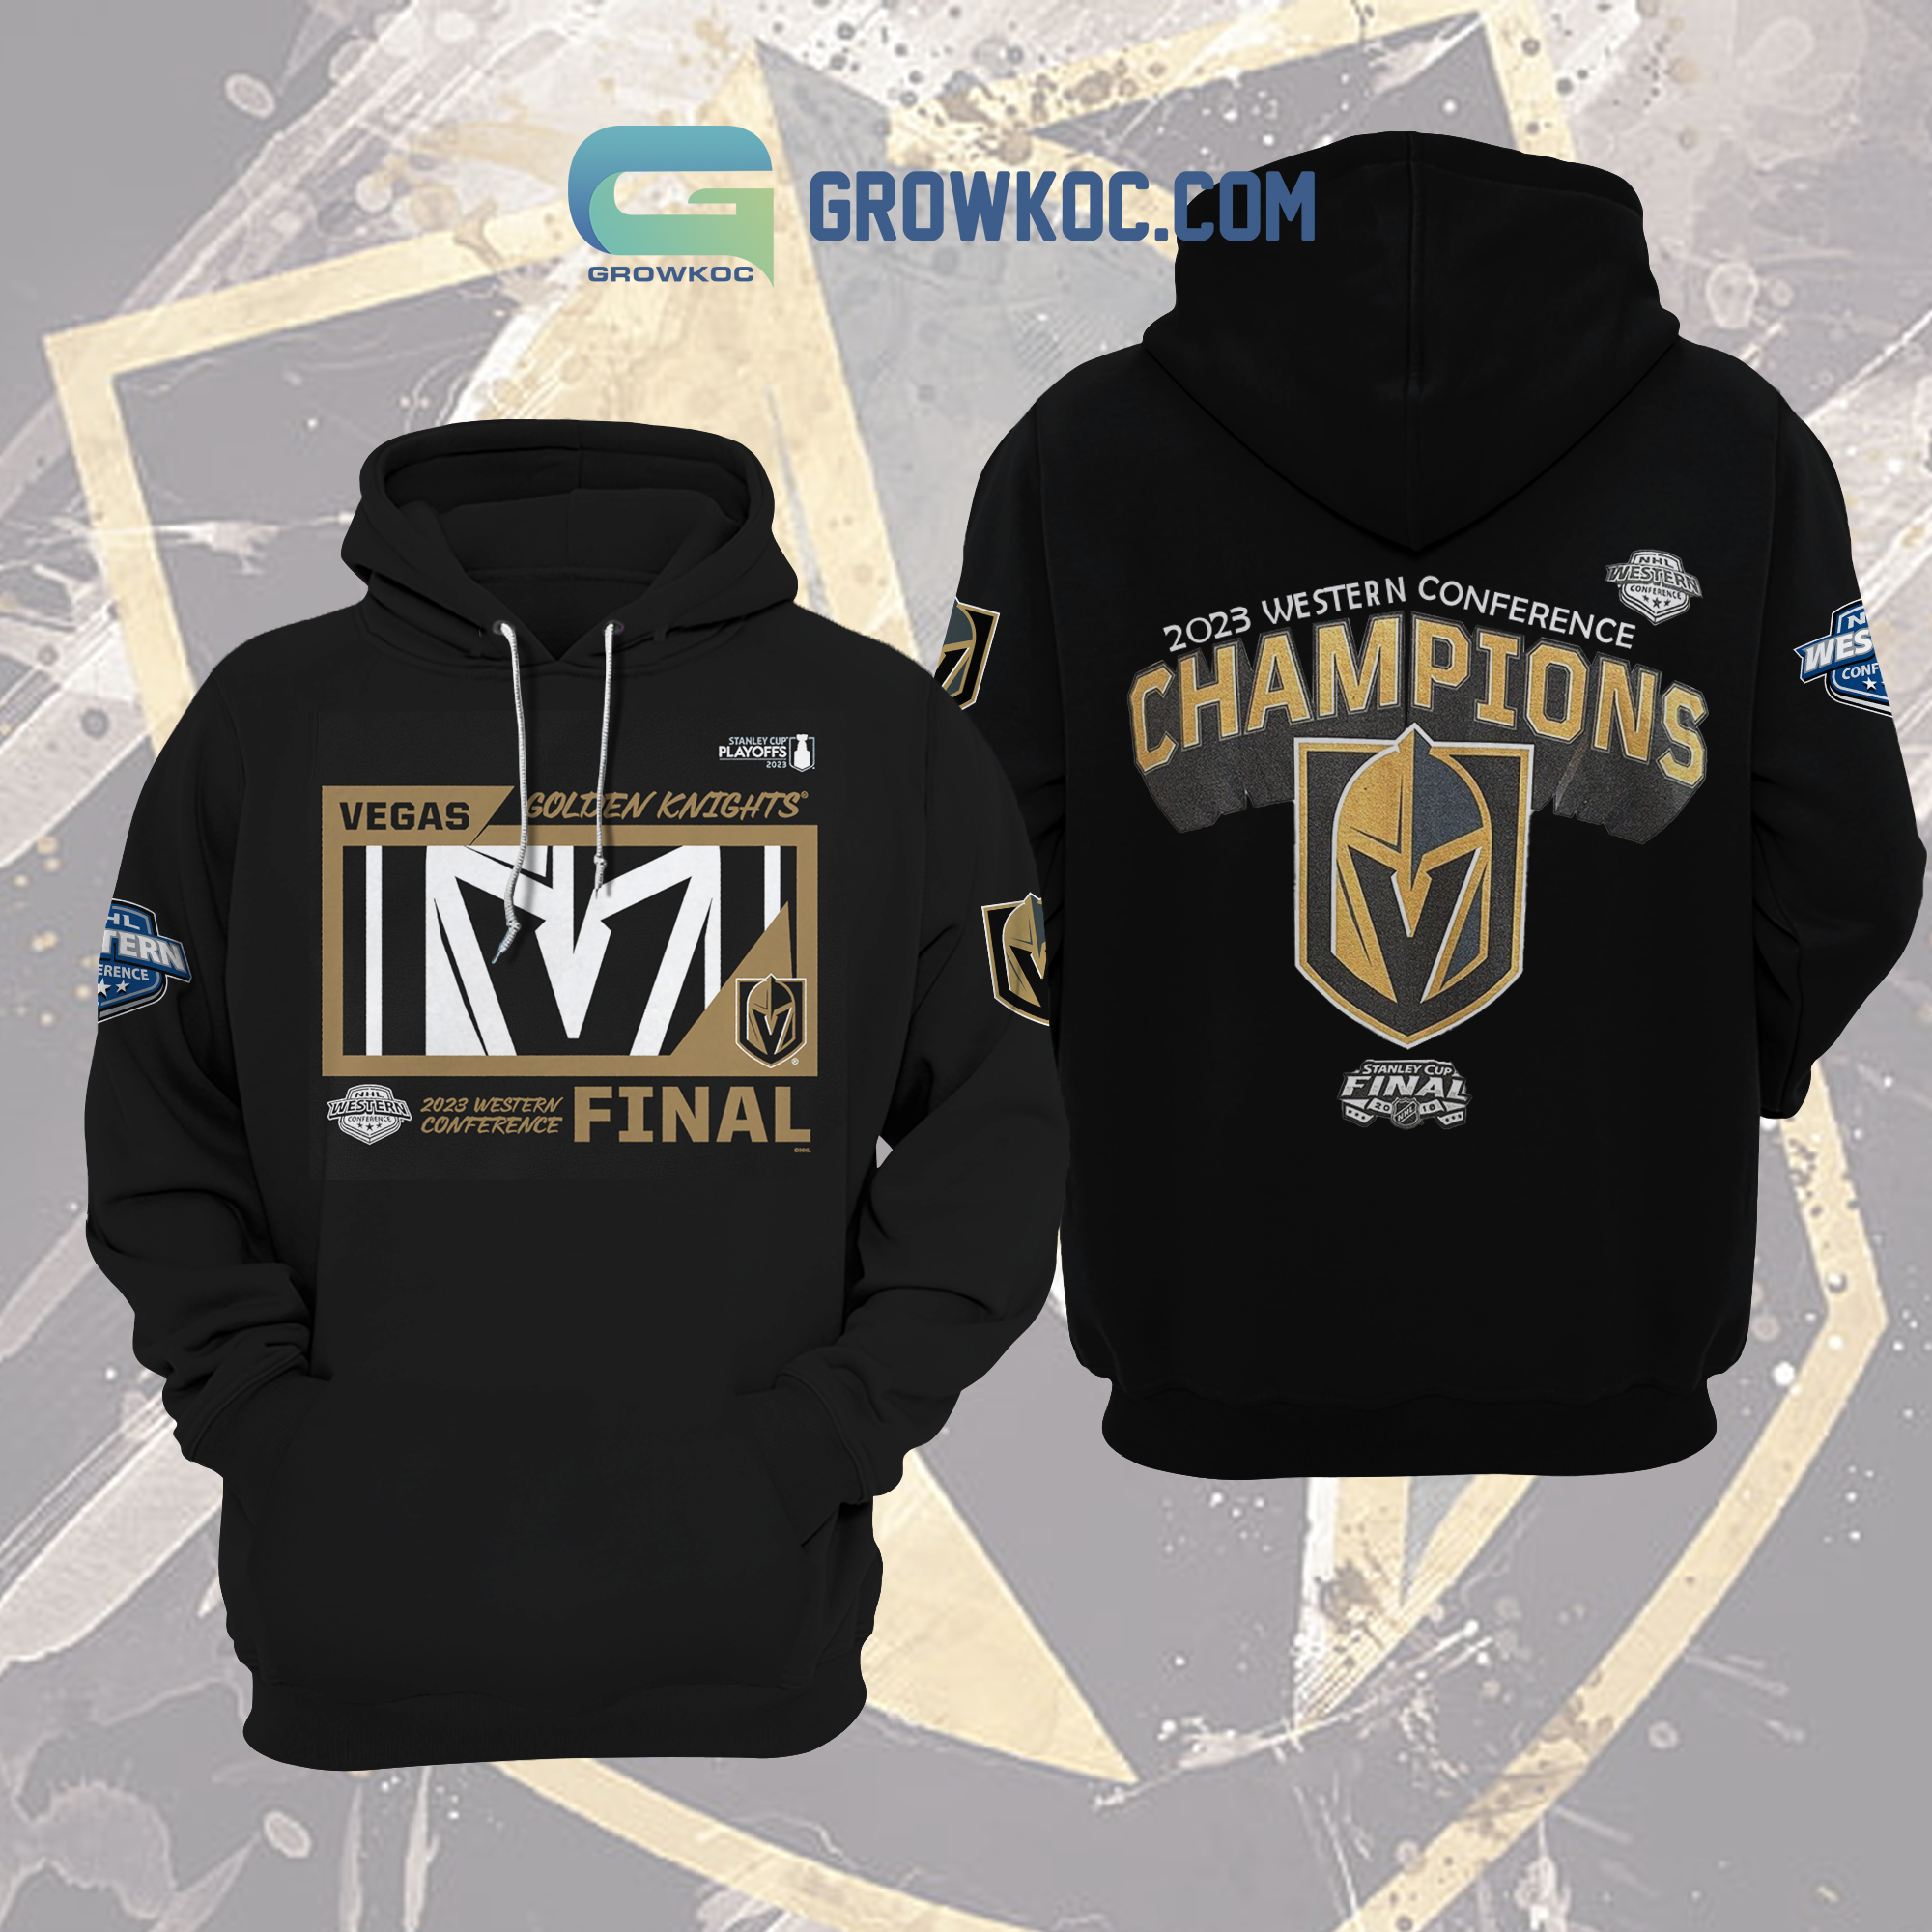 Vegas Golden Knights Champs Western Conference Champions 2023 Hoodie T-Shirt